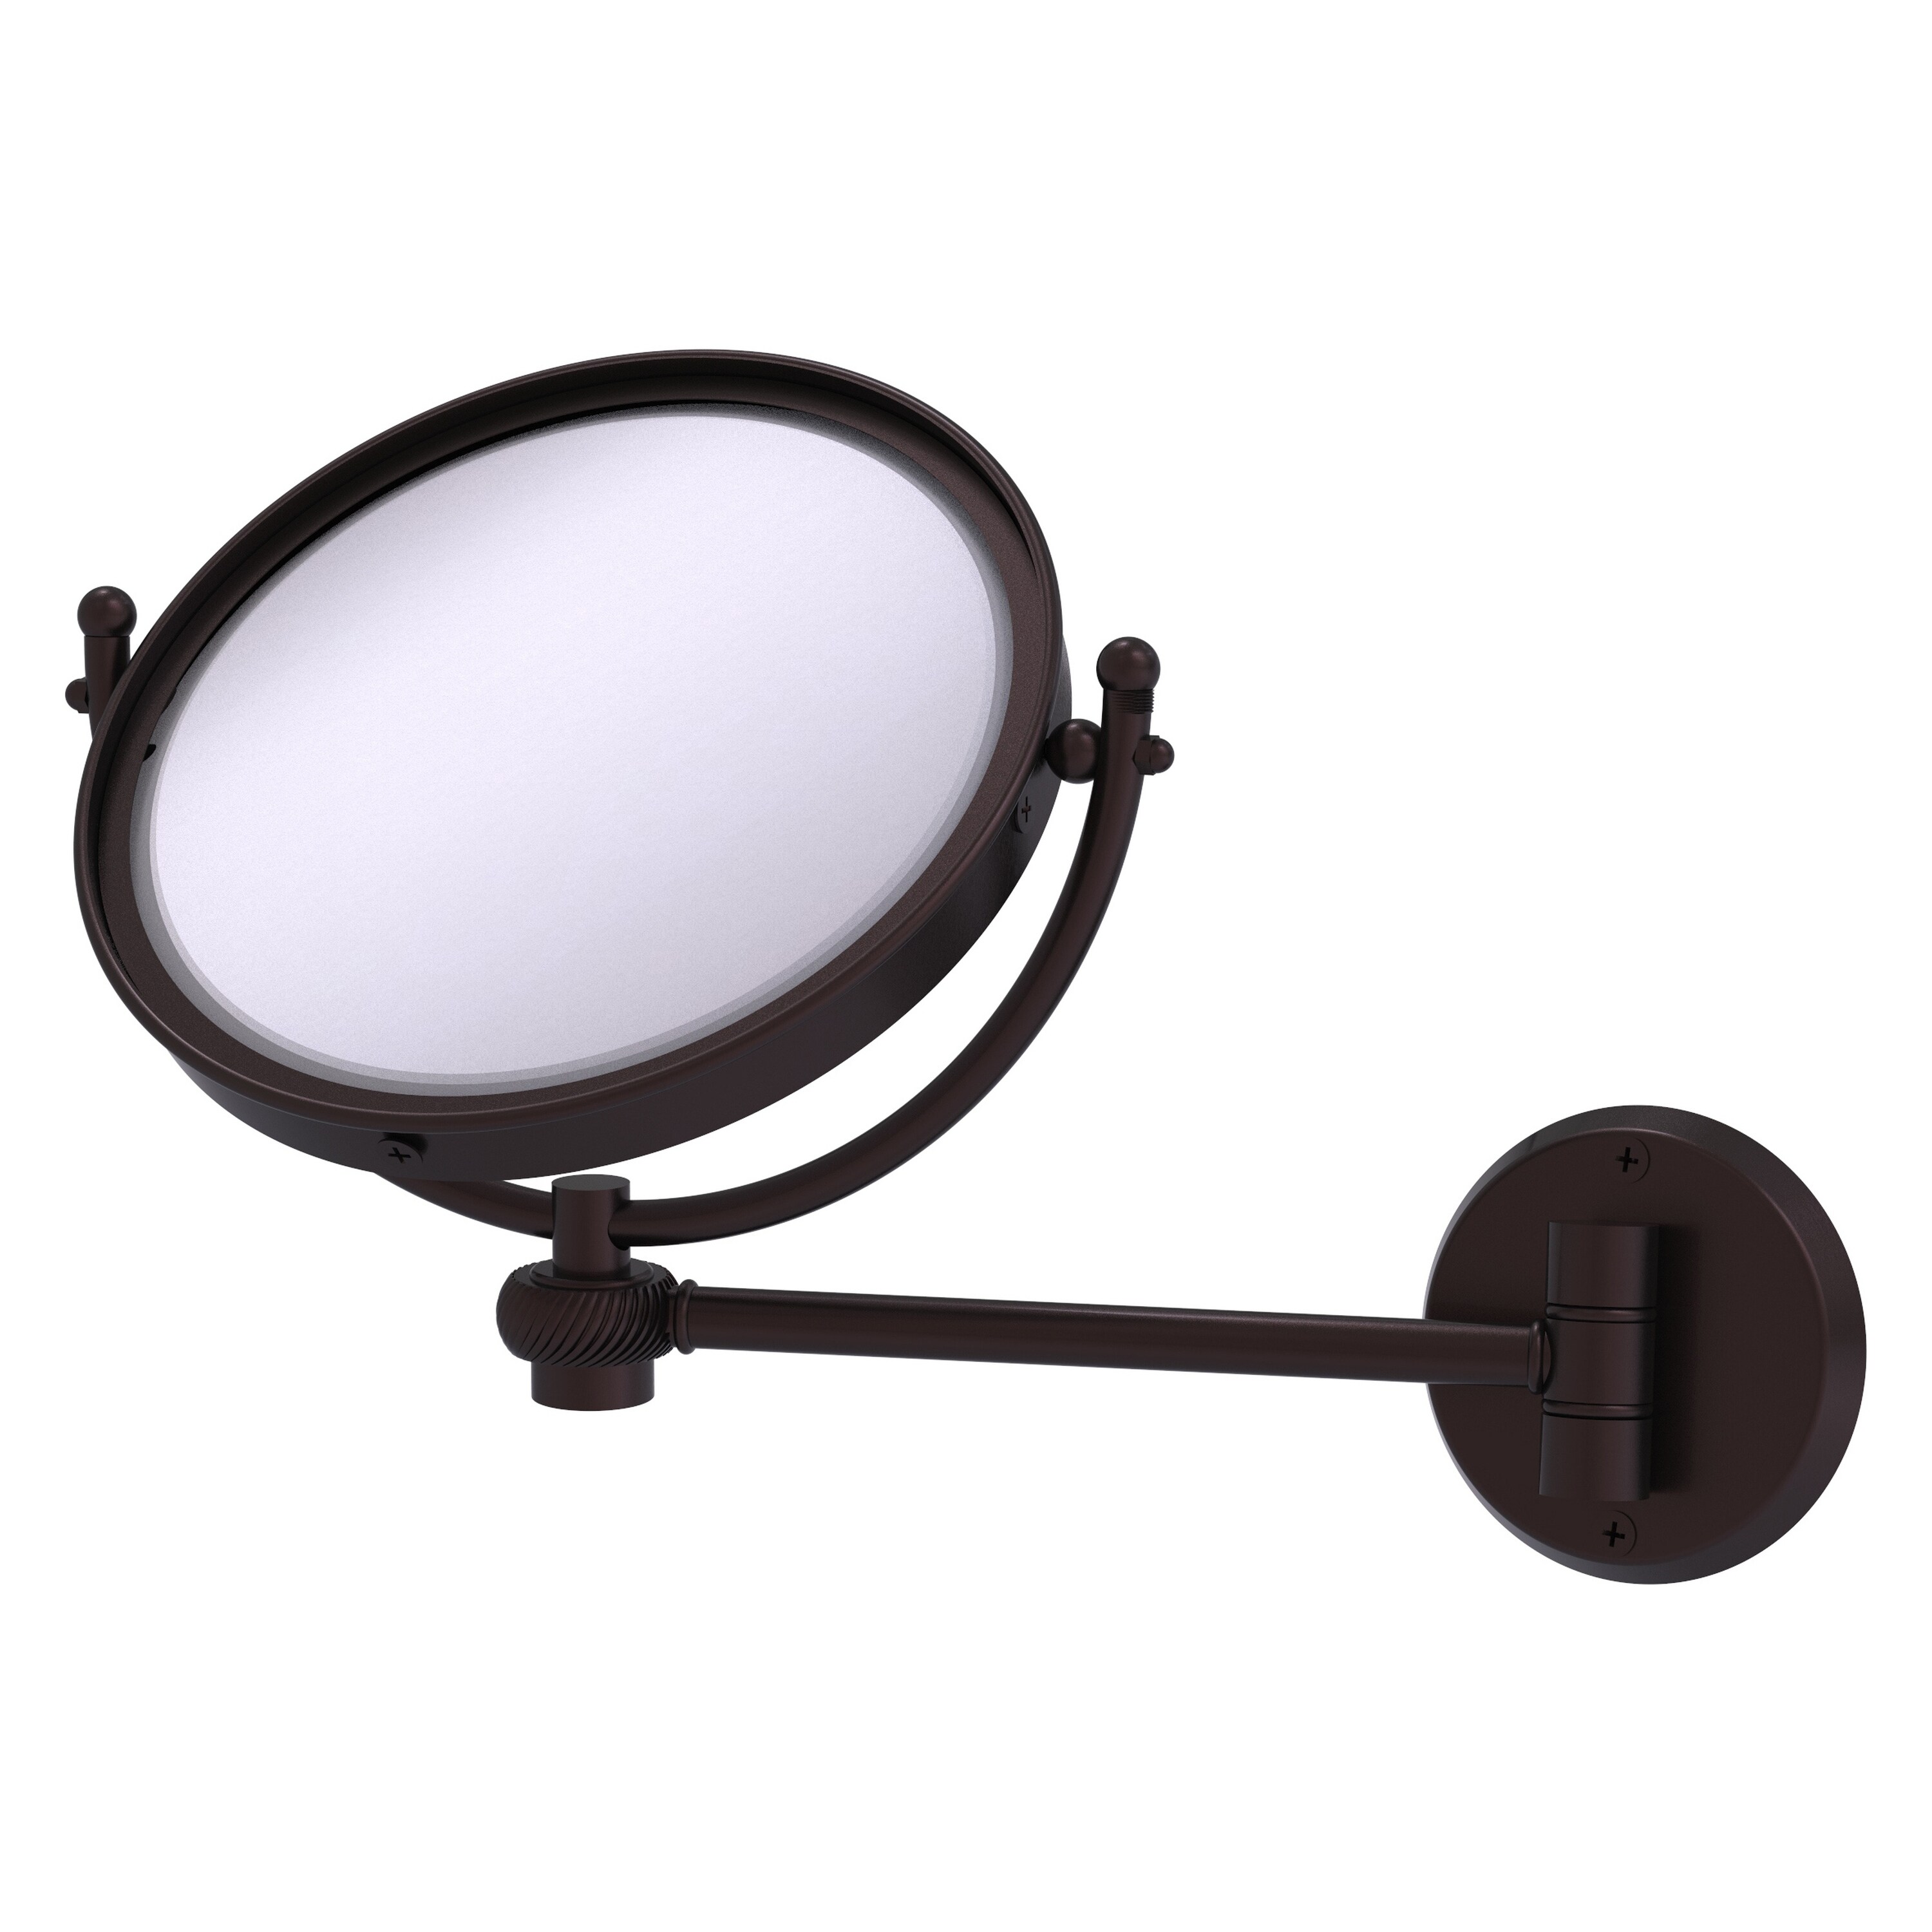 8-in x 10-in Antique Brown Double-sided 3X Magnifying Wall-mounted Vanity Mirror | - Allied Brass WM-5T/3X-ABZ